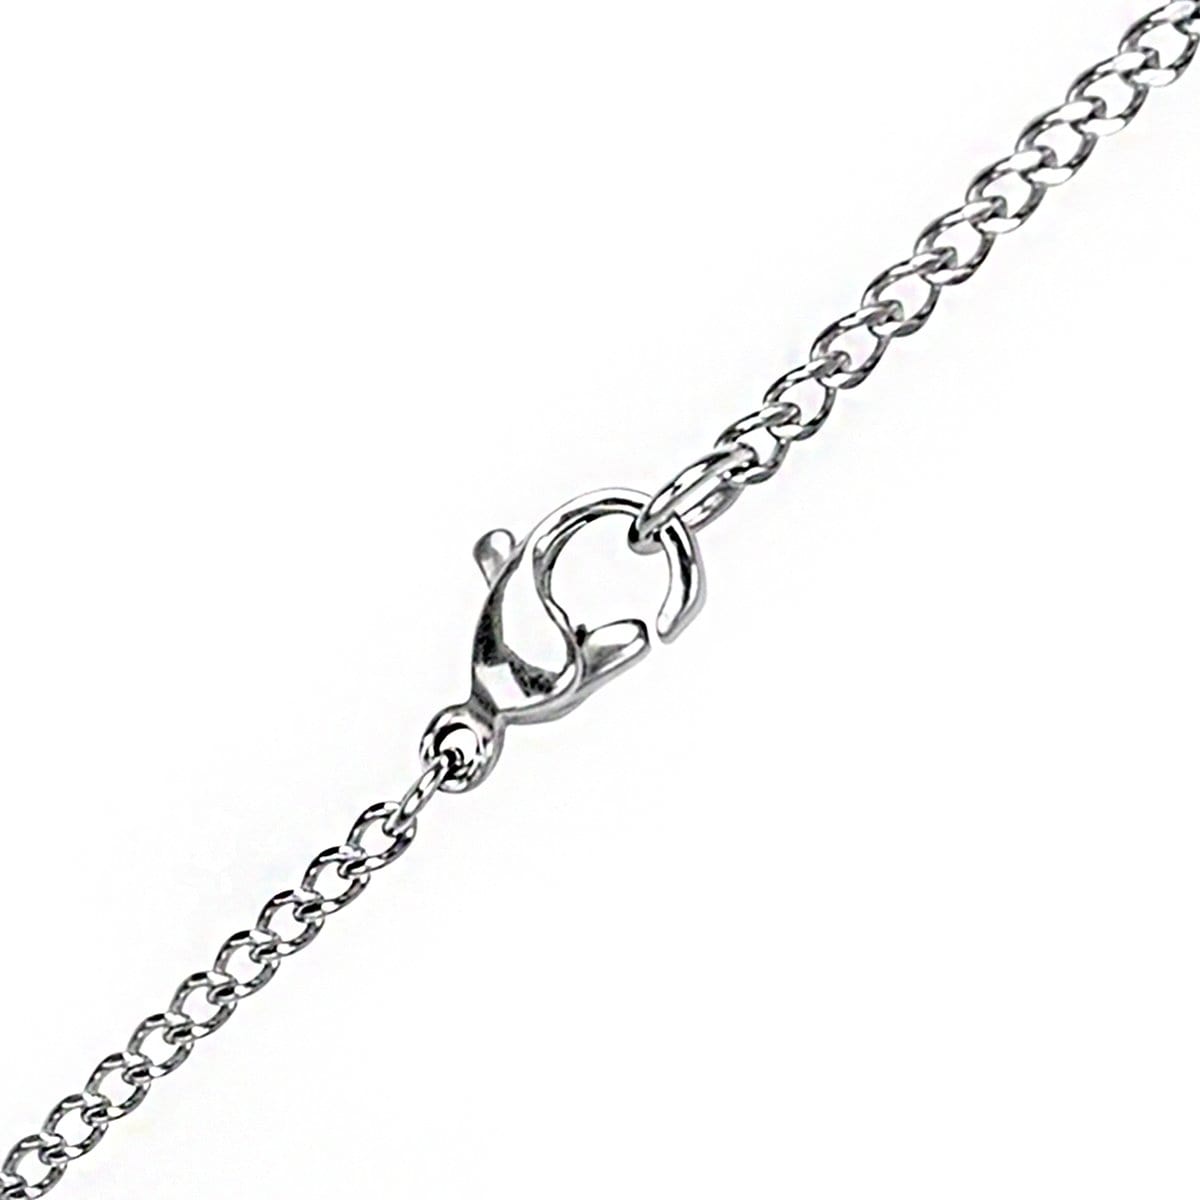 INOX JEWELRY Chains Silver Tone Stainless Steel 2mm Two-Face Diamond Cut Design Chain